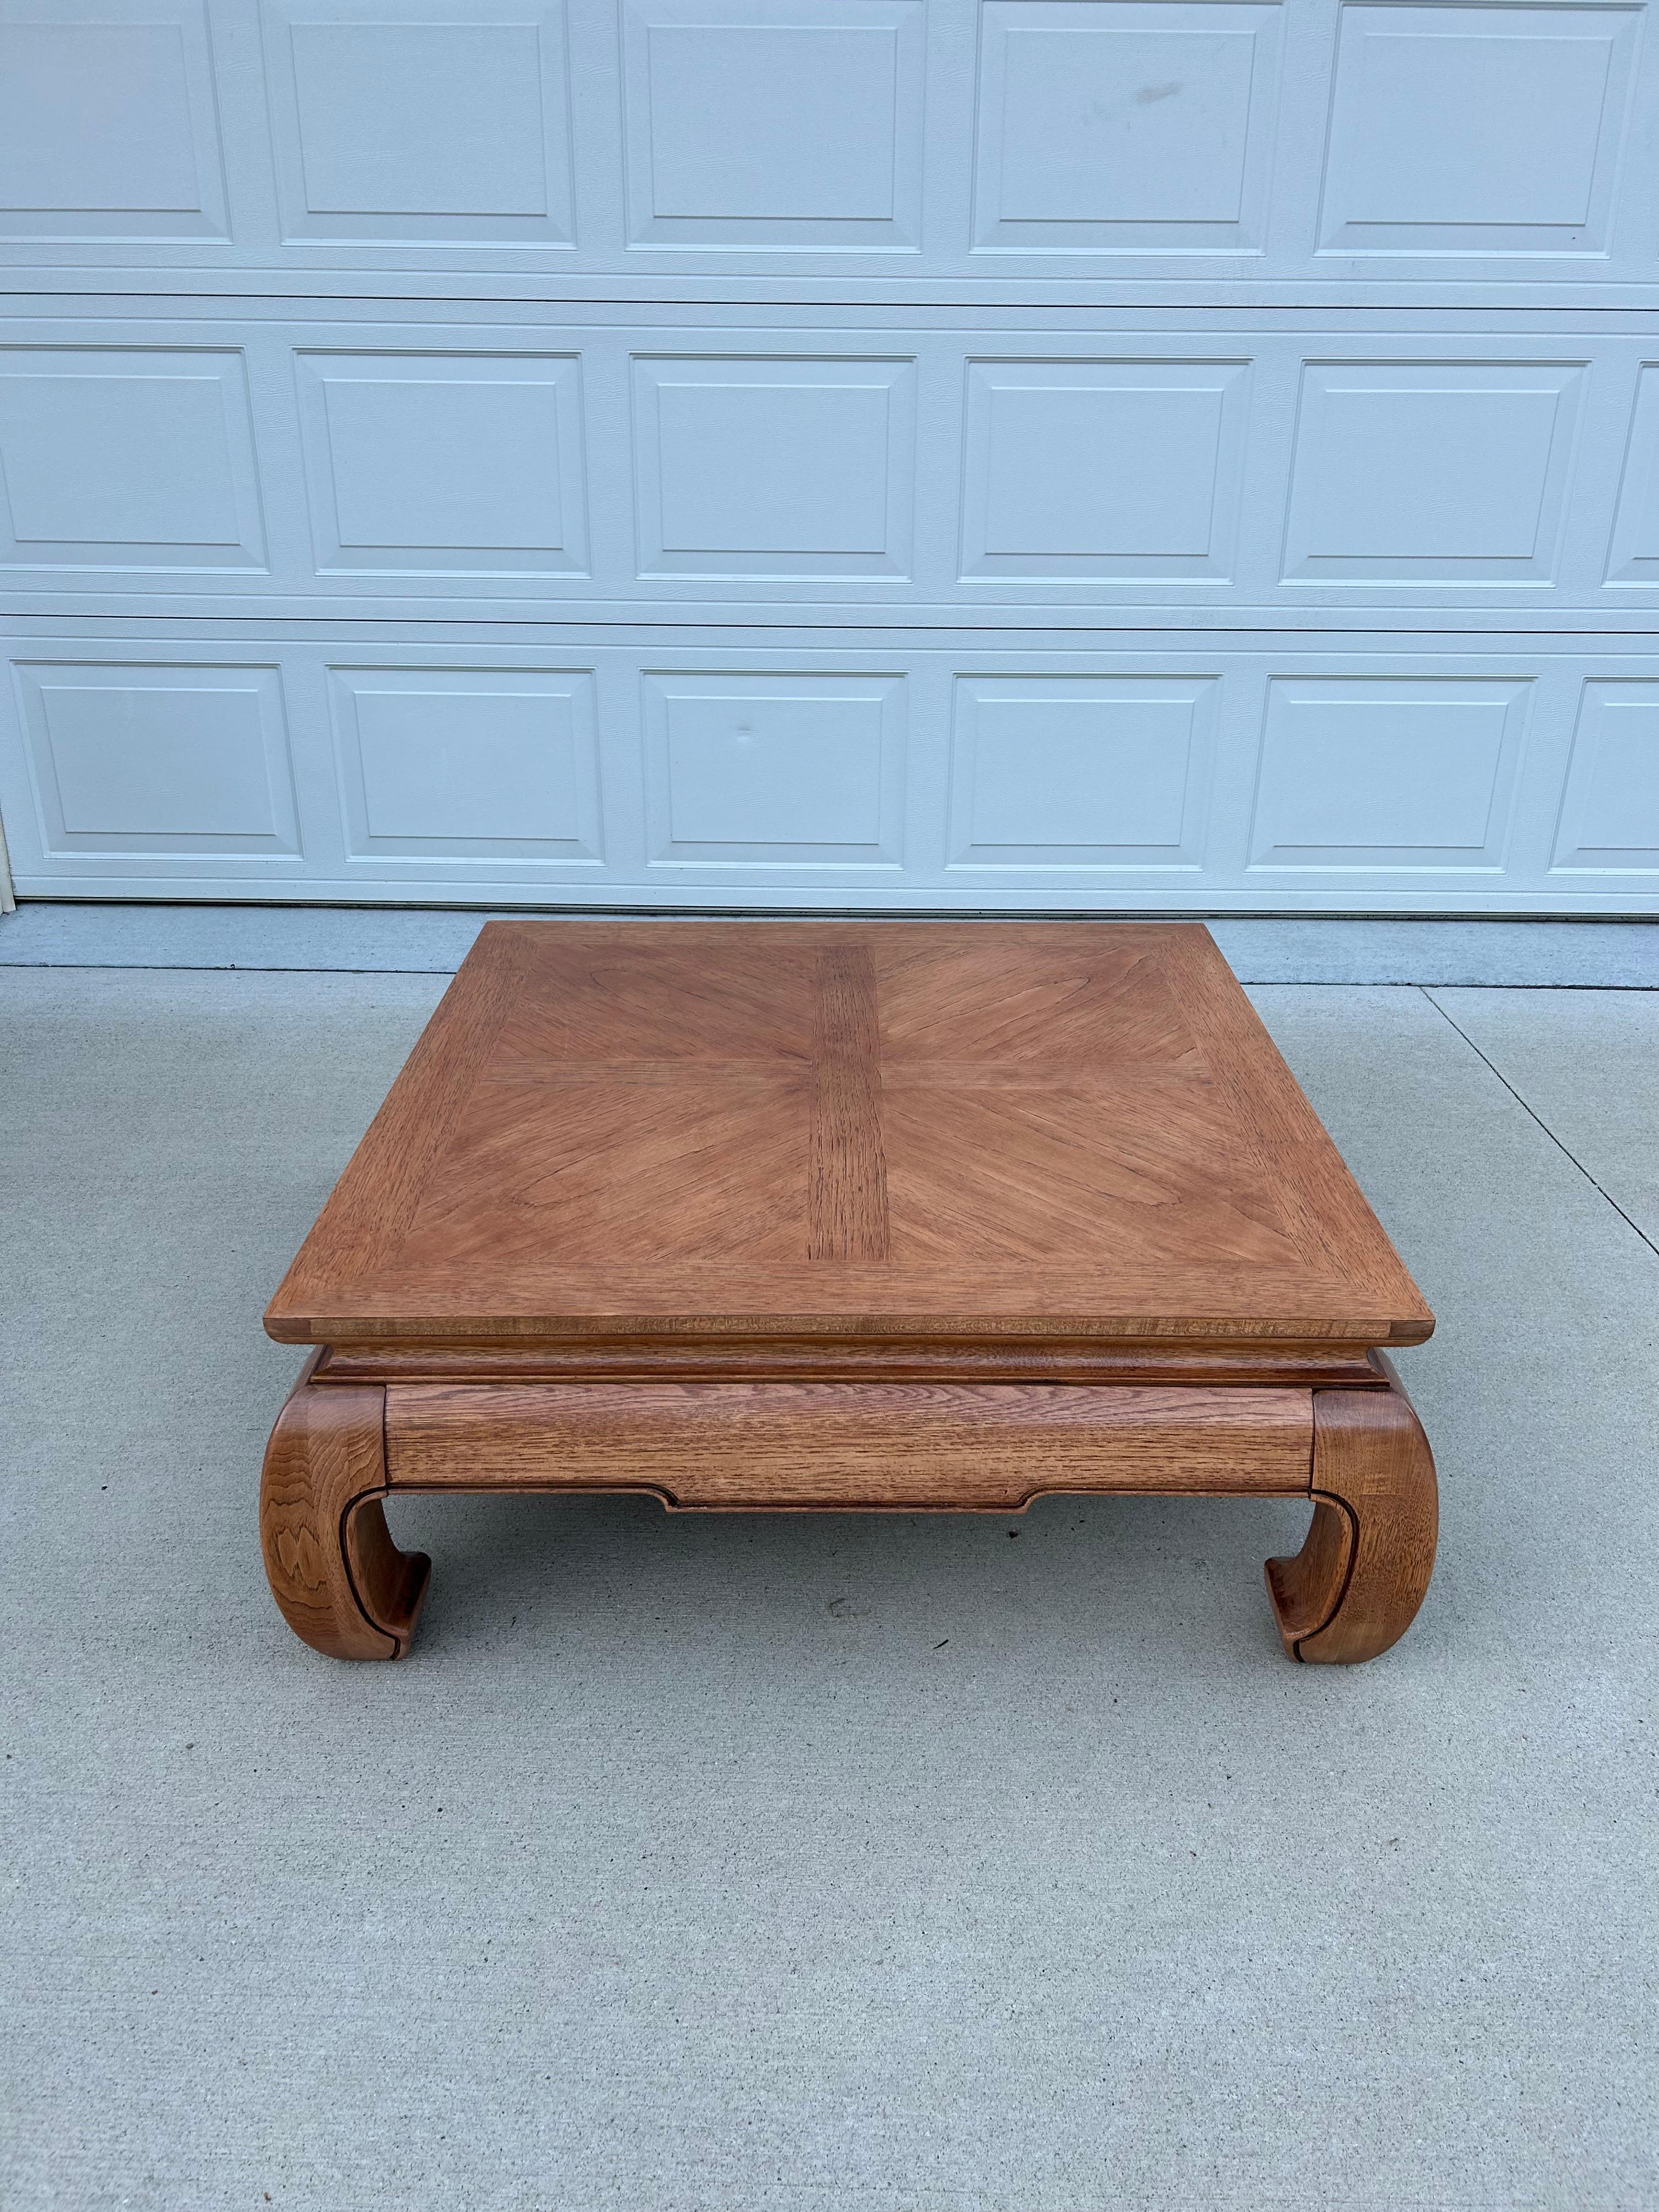 Large Ming style Coffee Table by what we believe was Henredon. The tag seems to have been removed from under the table. The table is in an amazing condition, with a few scuffs due to age and movers using dolly's. There aren't too many large all wood